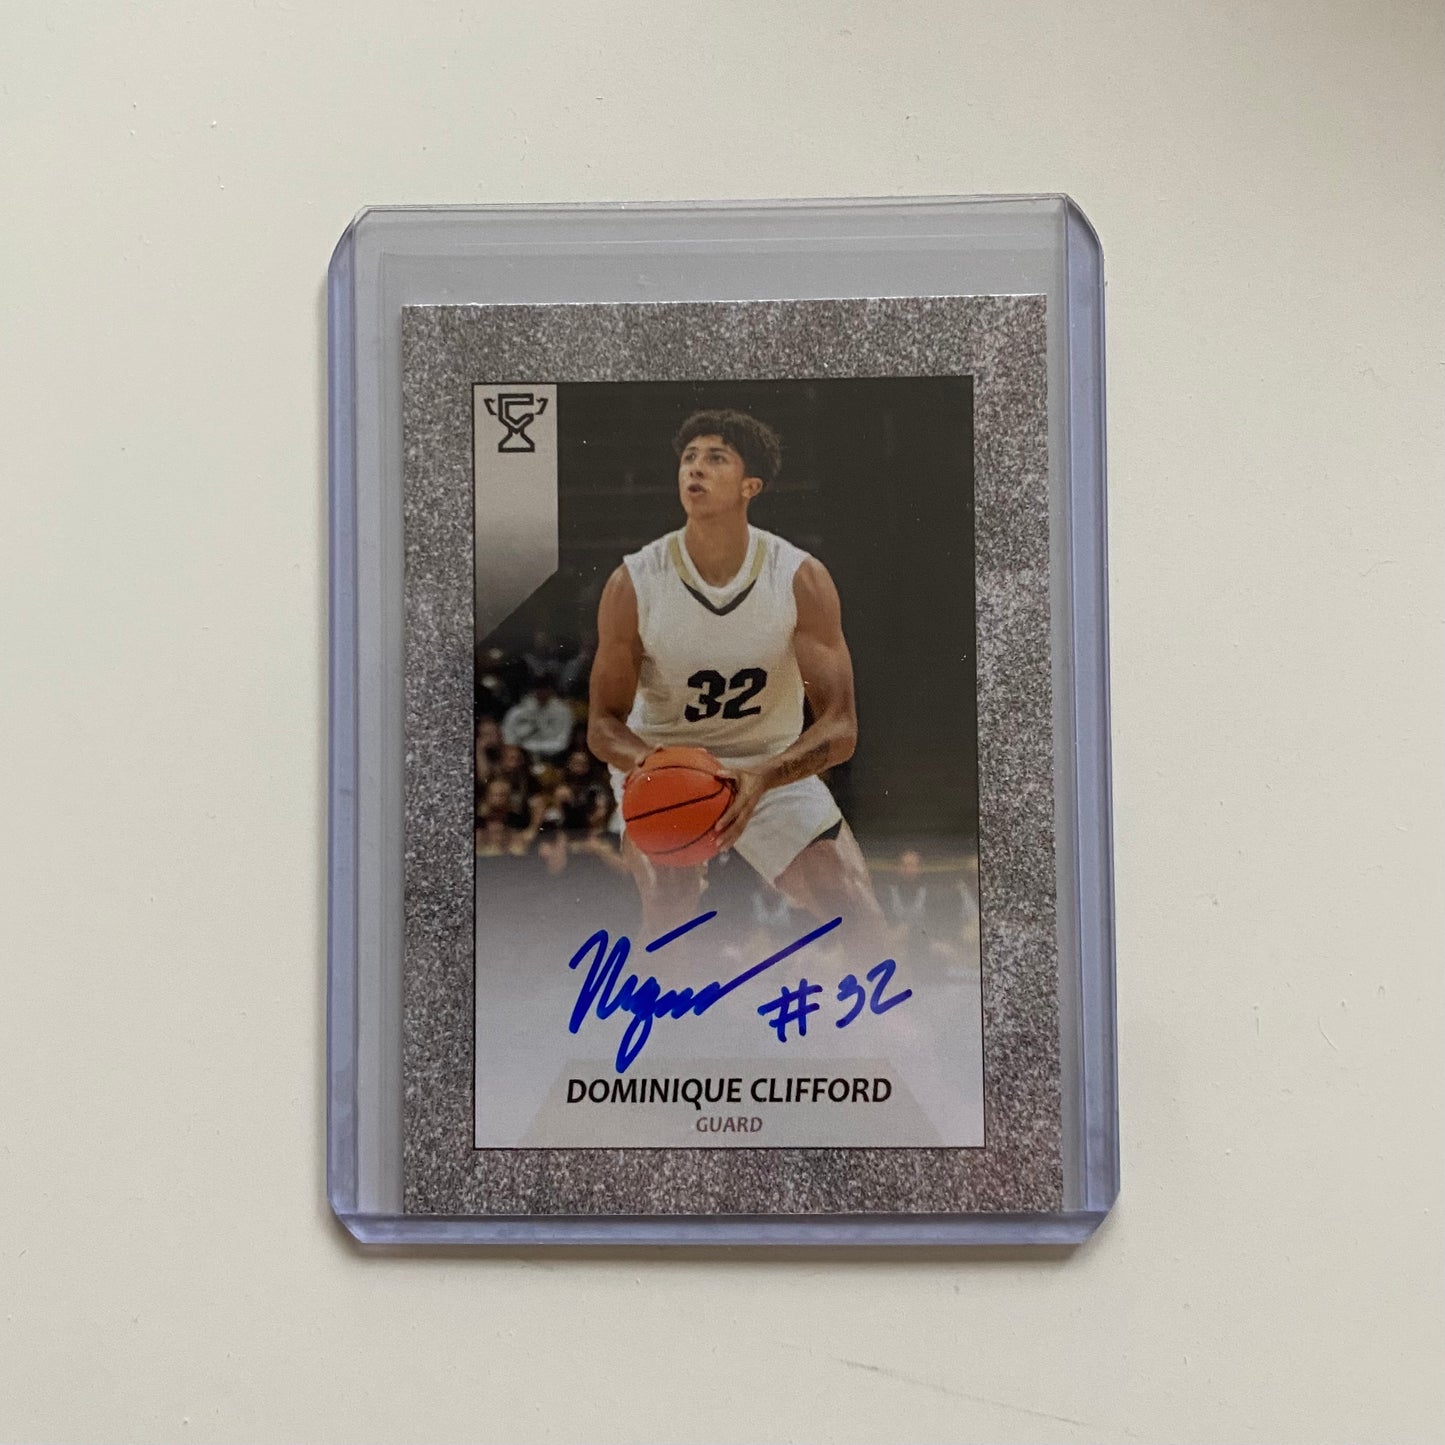 Autographed trading card of Dominique Clifford in white uniform.